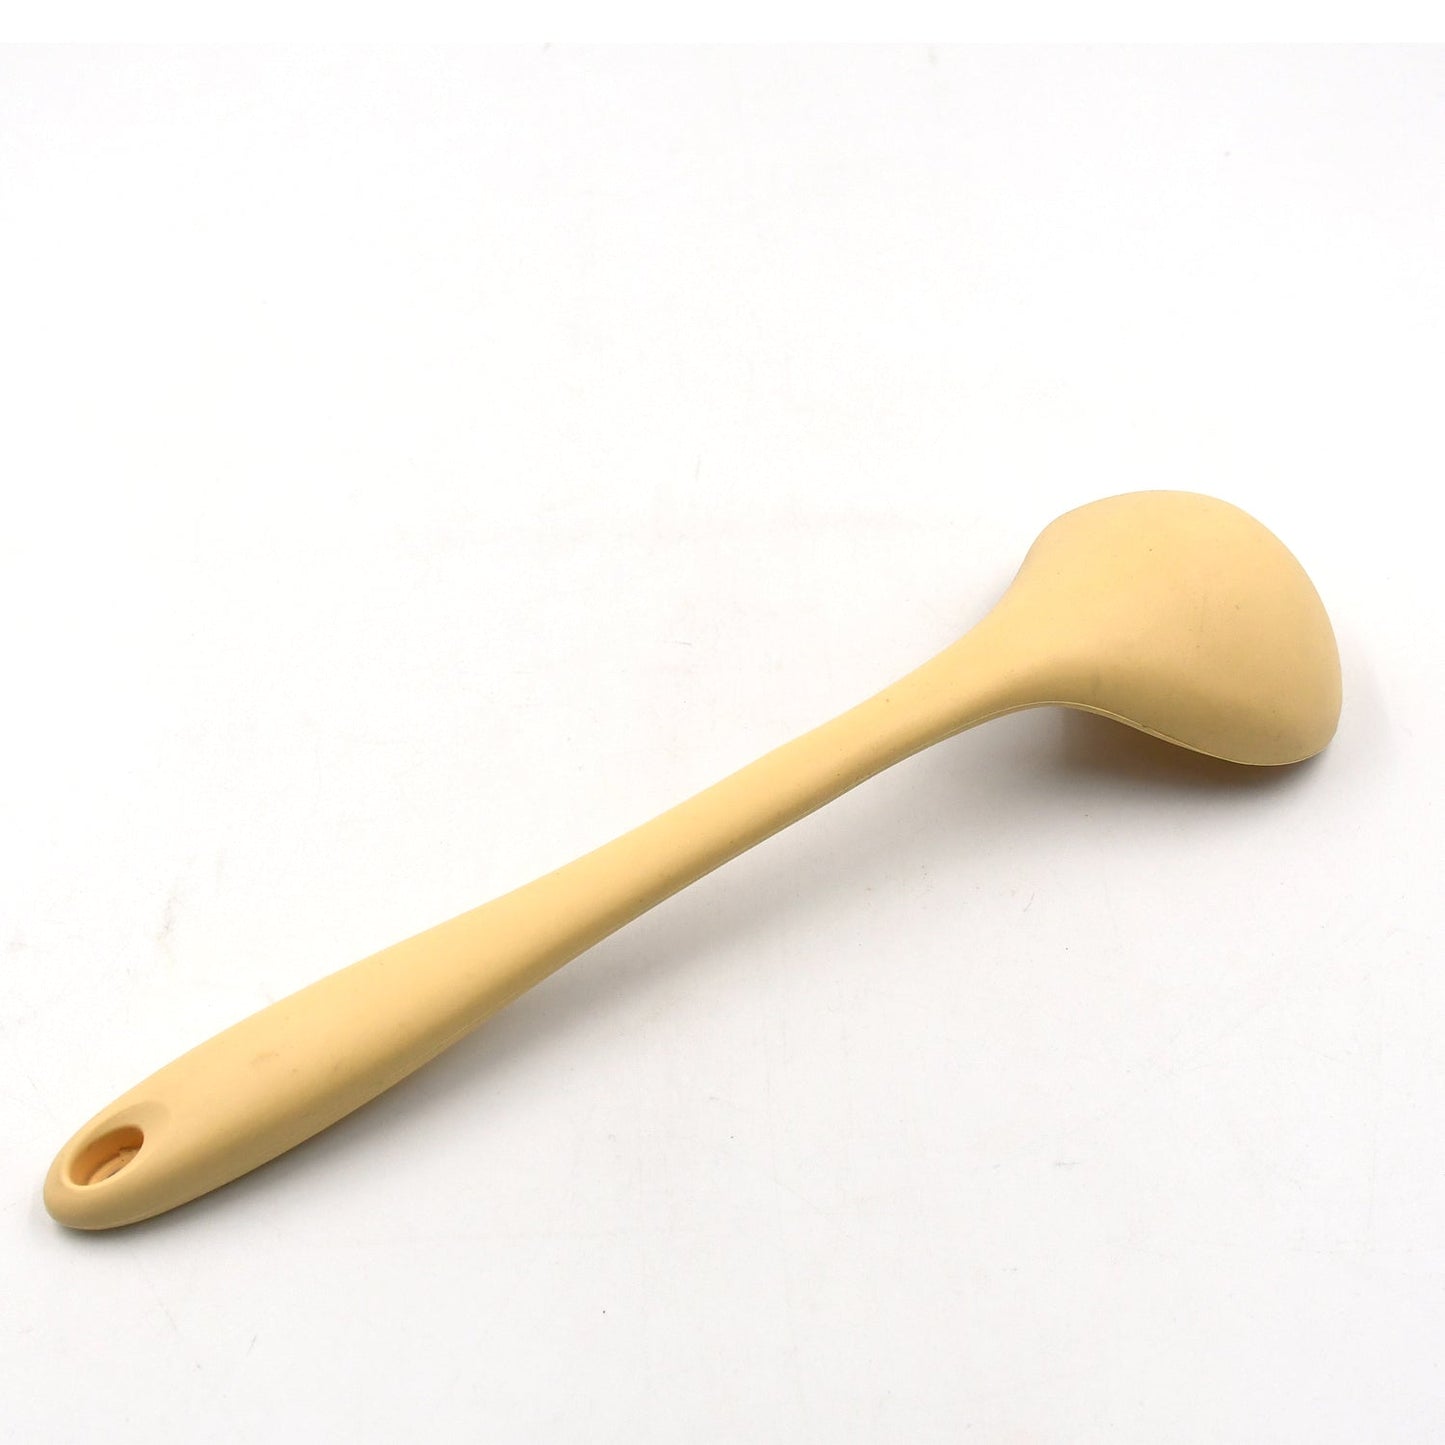 5452 Silicone Ladle Spoon, Heat Resistant Soup Ladle Scoop Spatula with Hygienic Solid Coating FDA Grade (28cm)